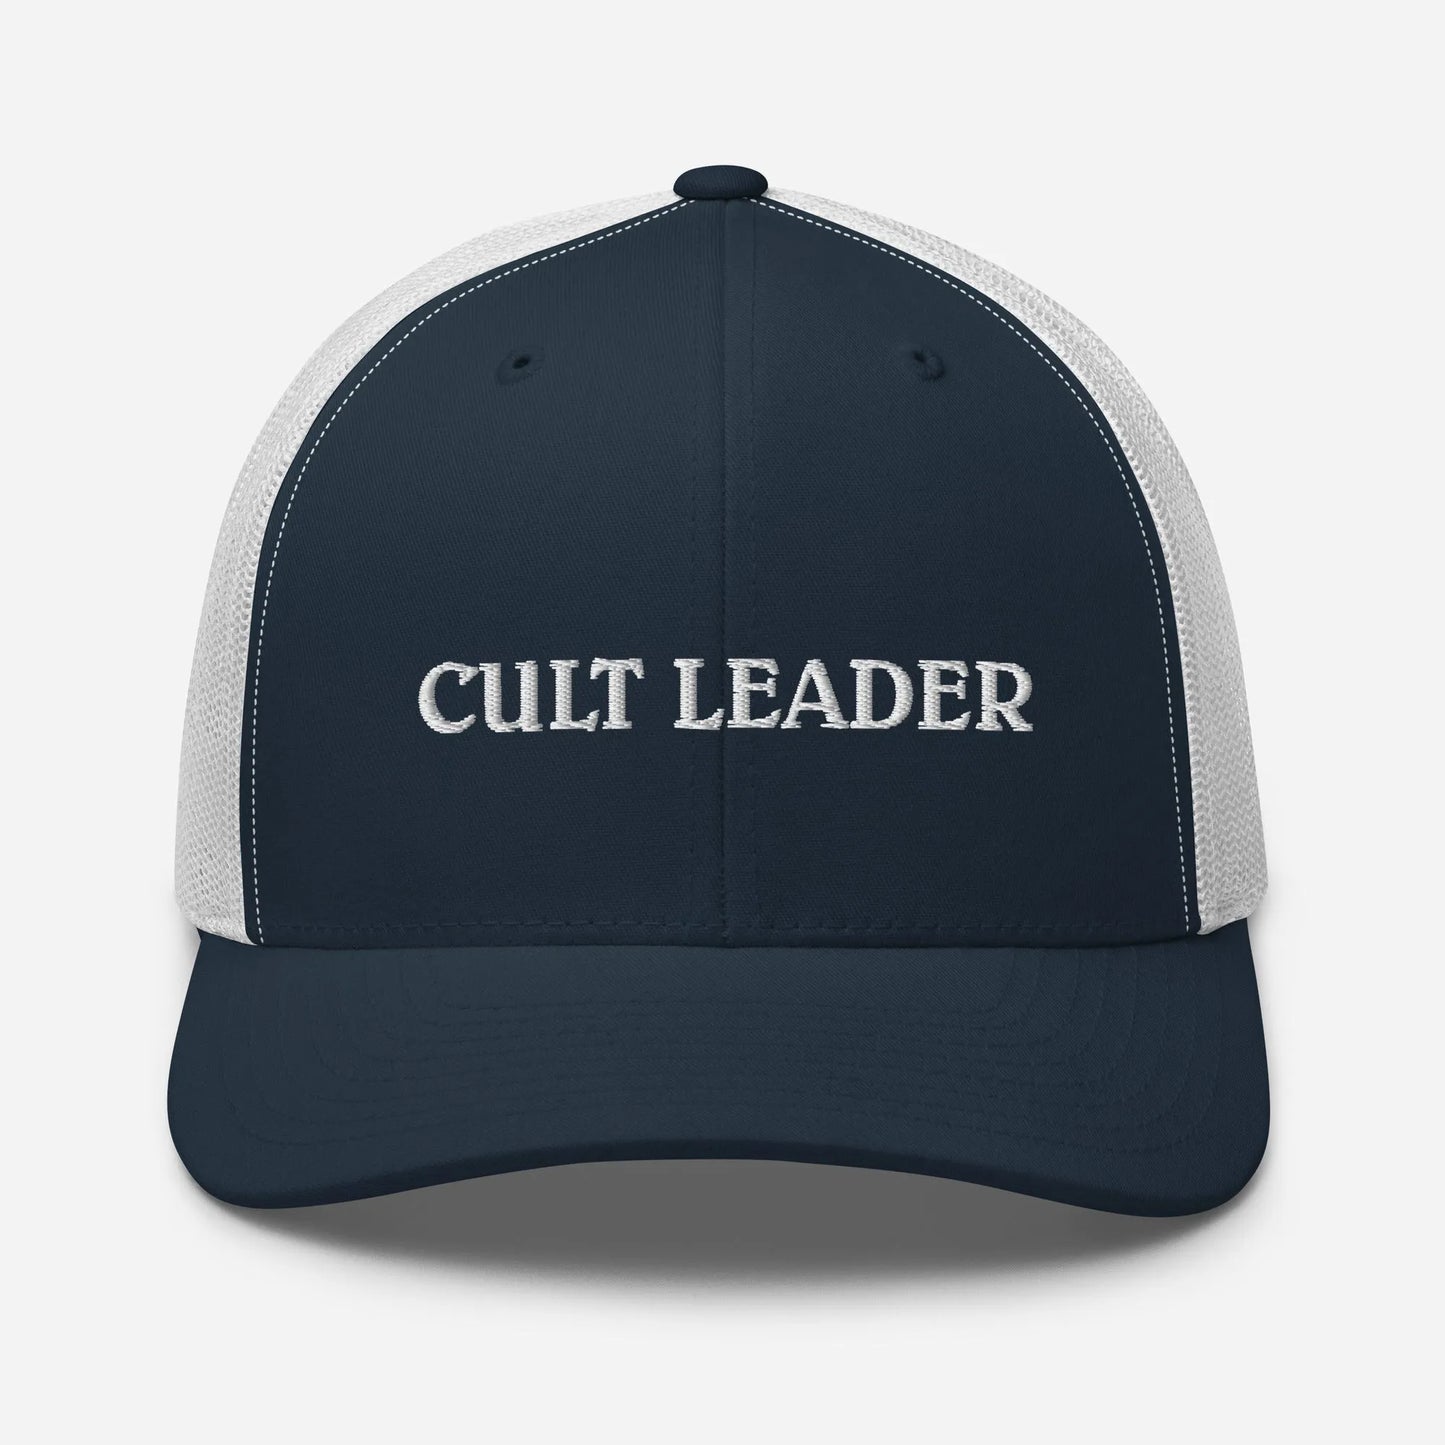 Cult Leader embroidered retro trucker hat by Rebel Girl Rampage